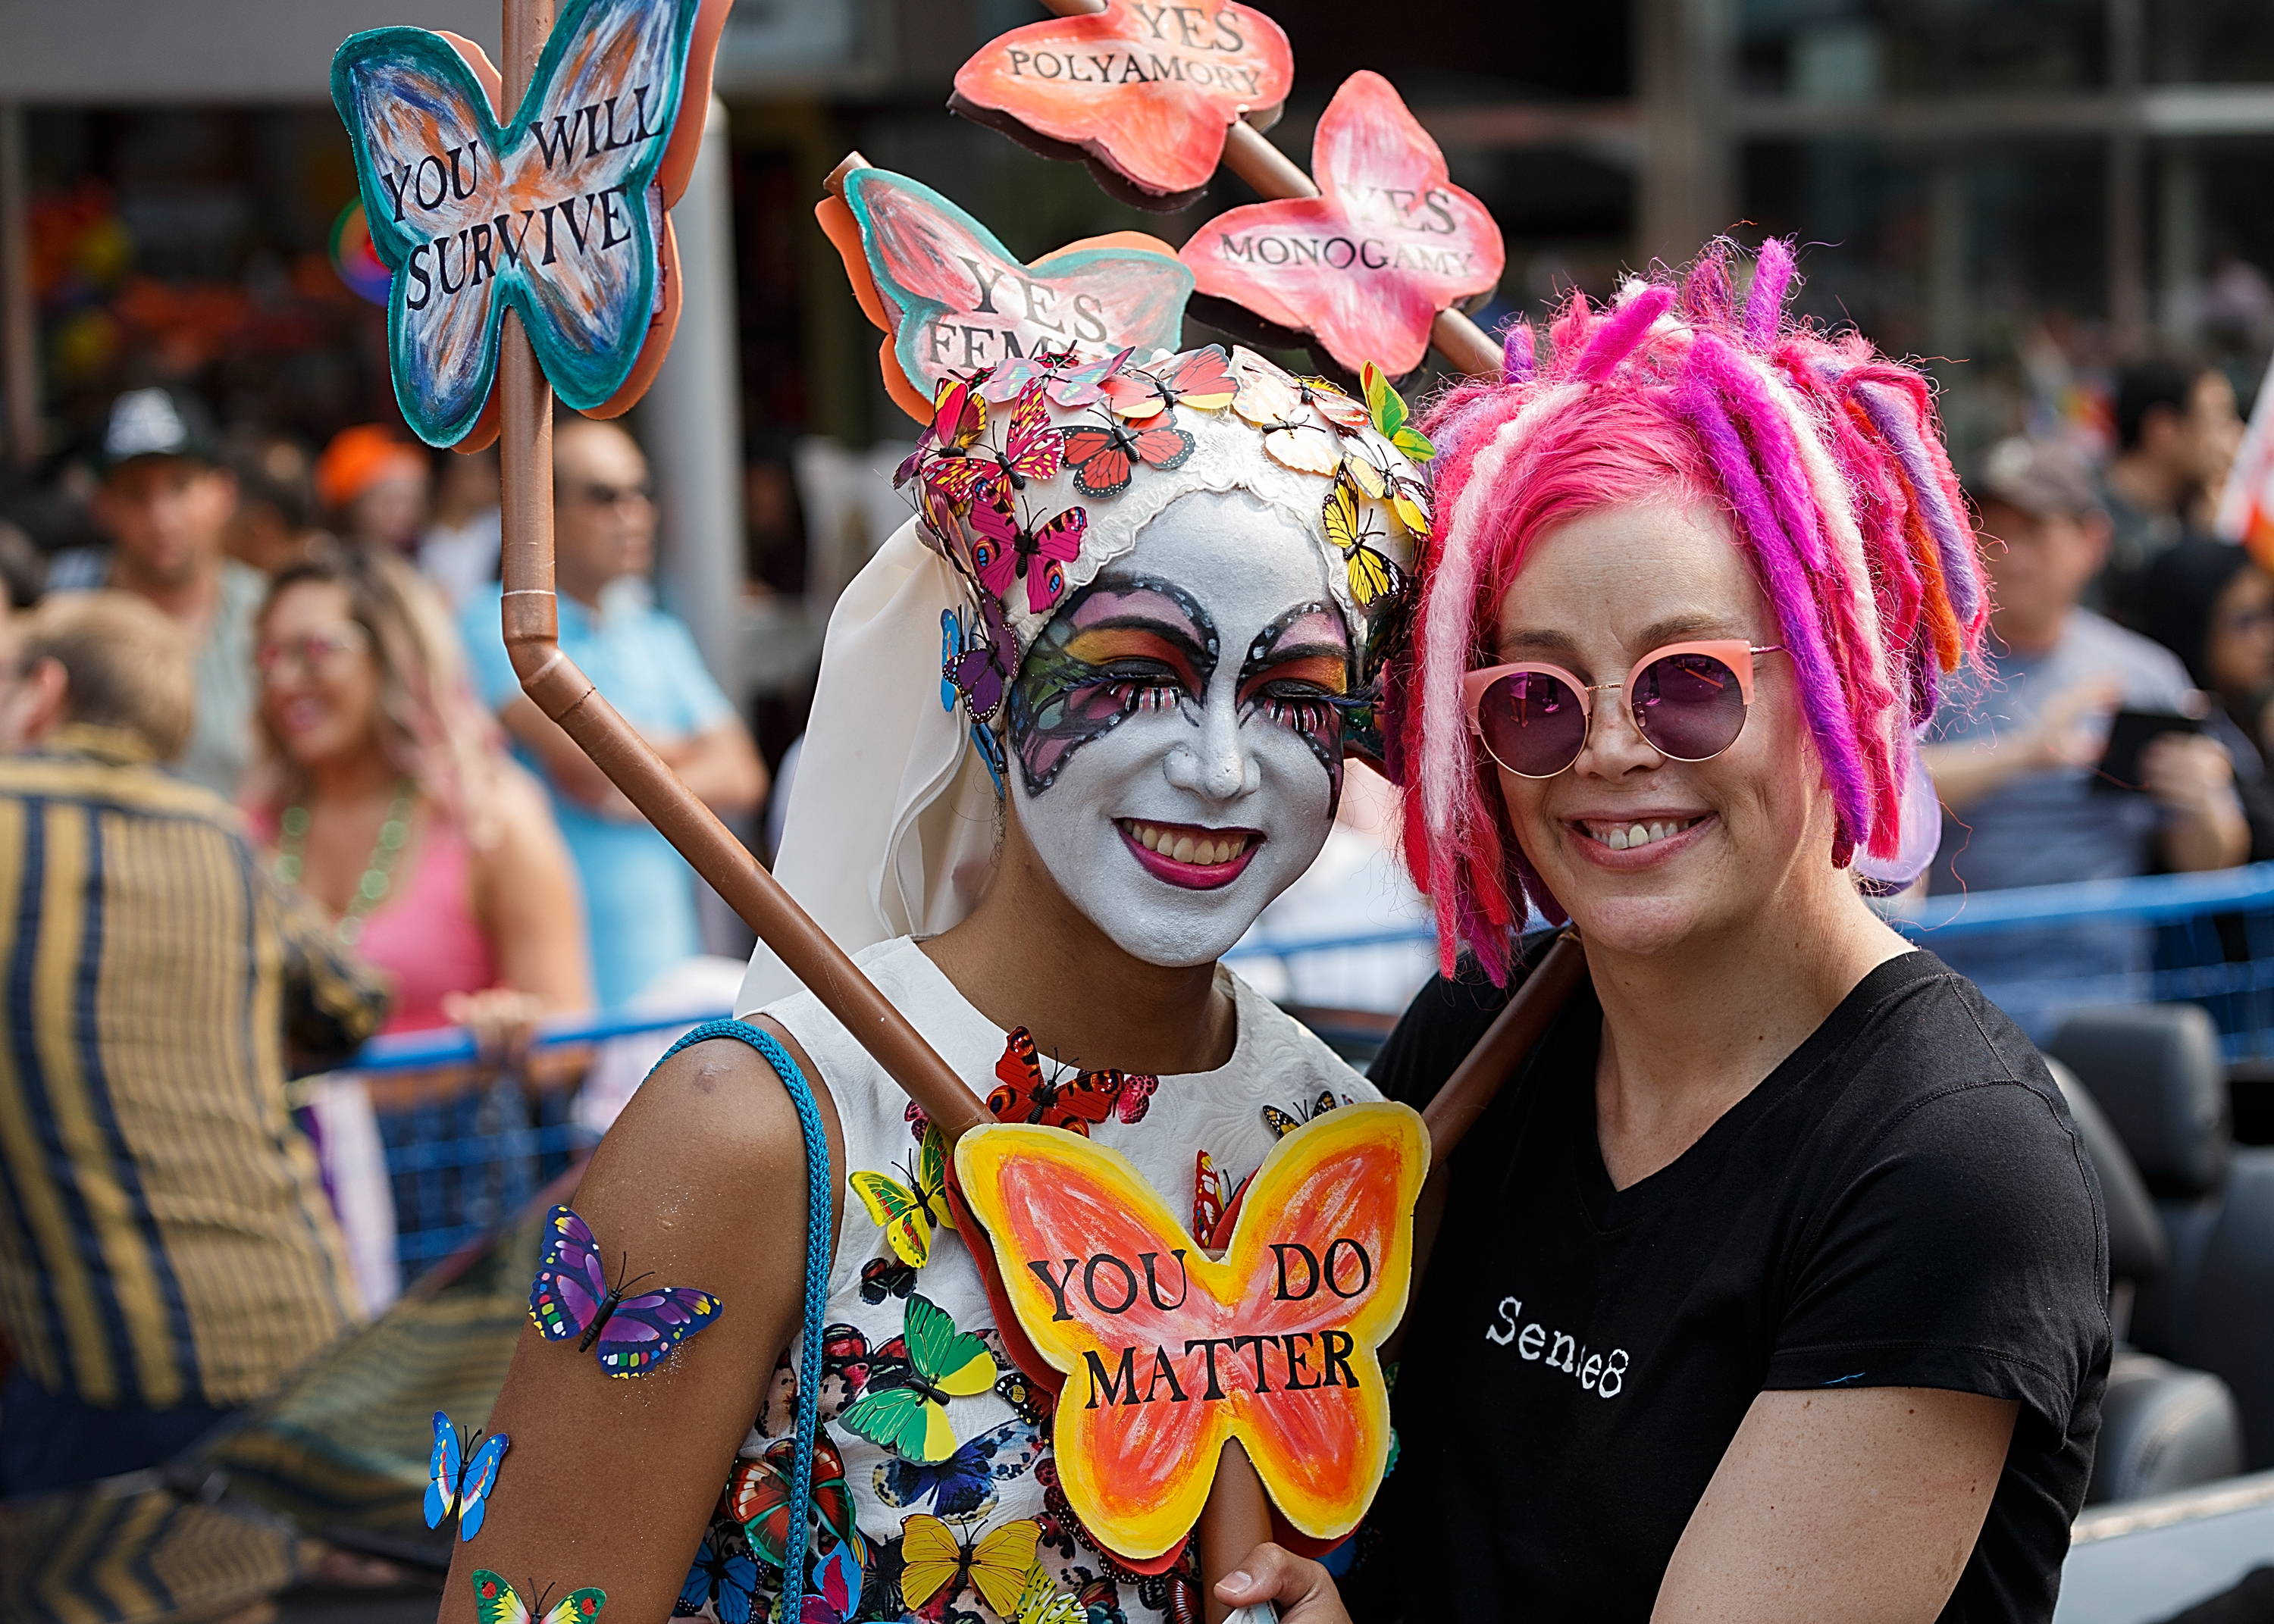 Lana Wachowski besucht die Vancouver Pride Parade am 6. August 2017 in Vancouver, Kanada. | Quelle: Getty Images